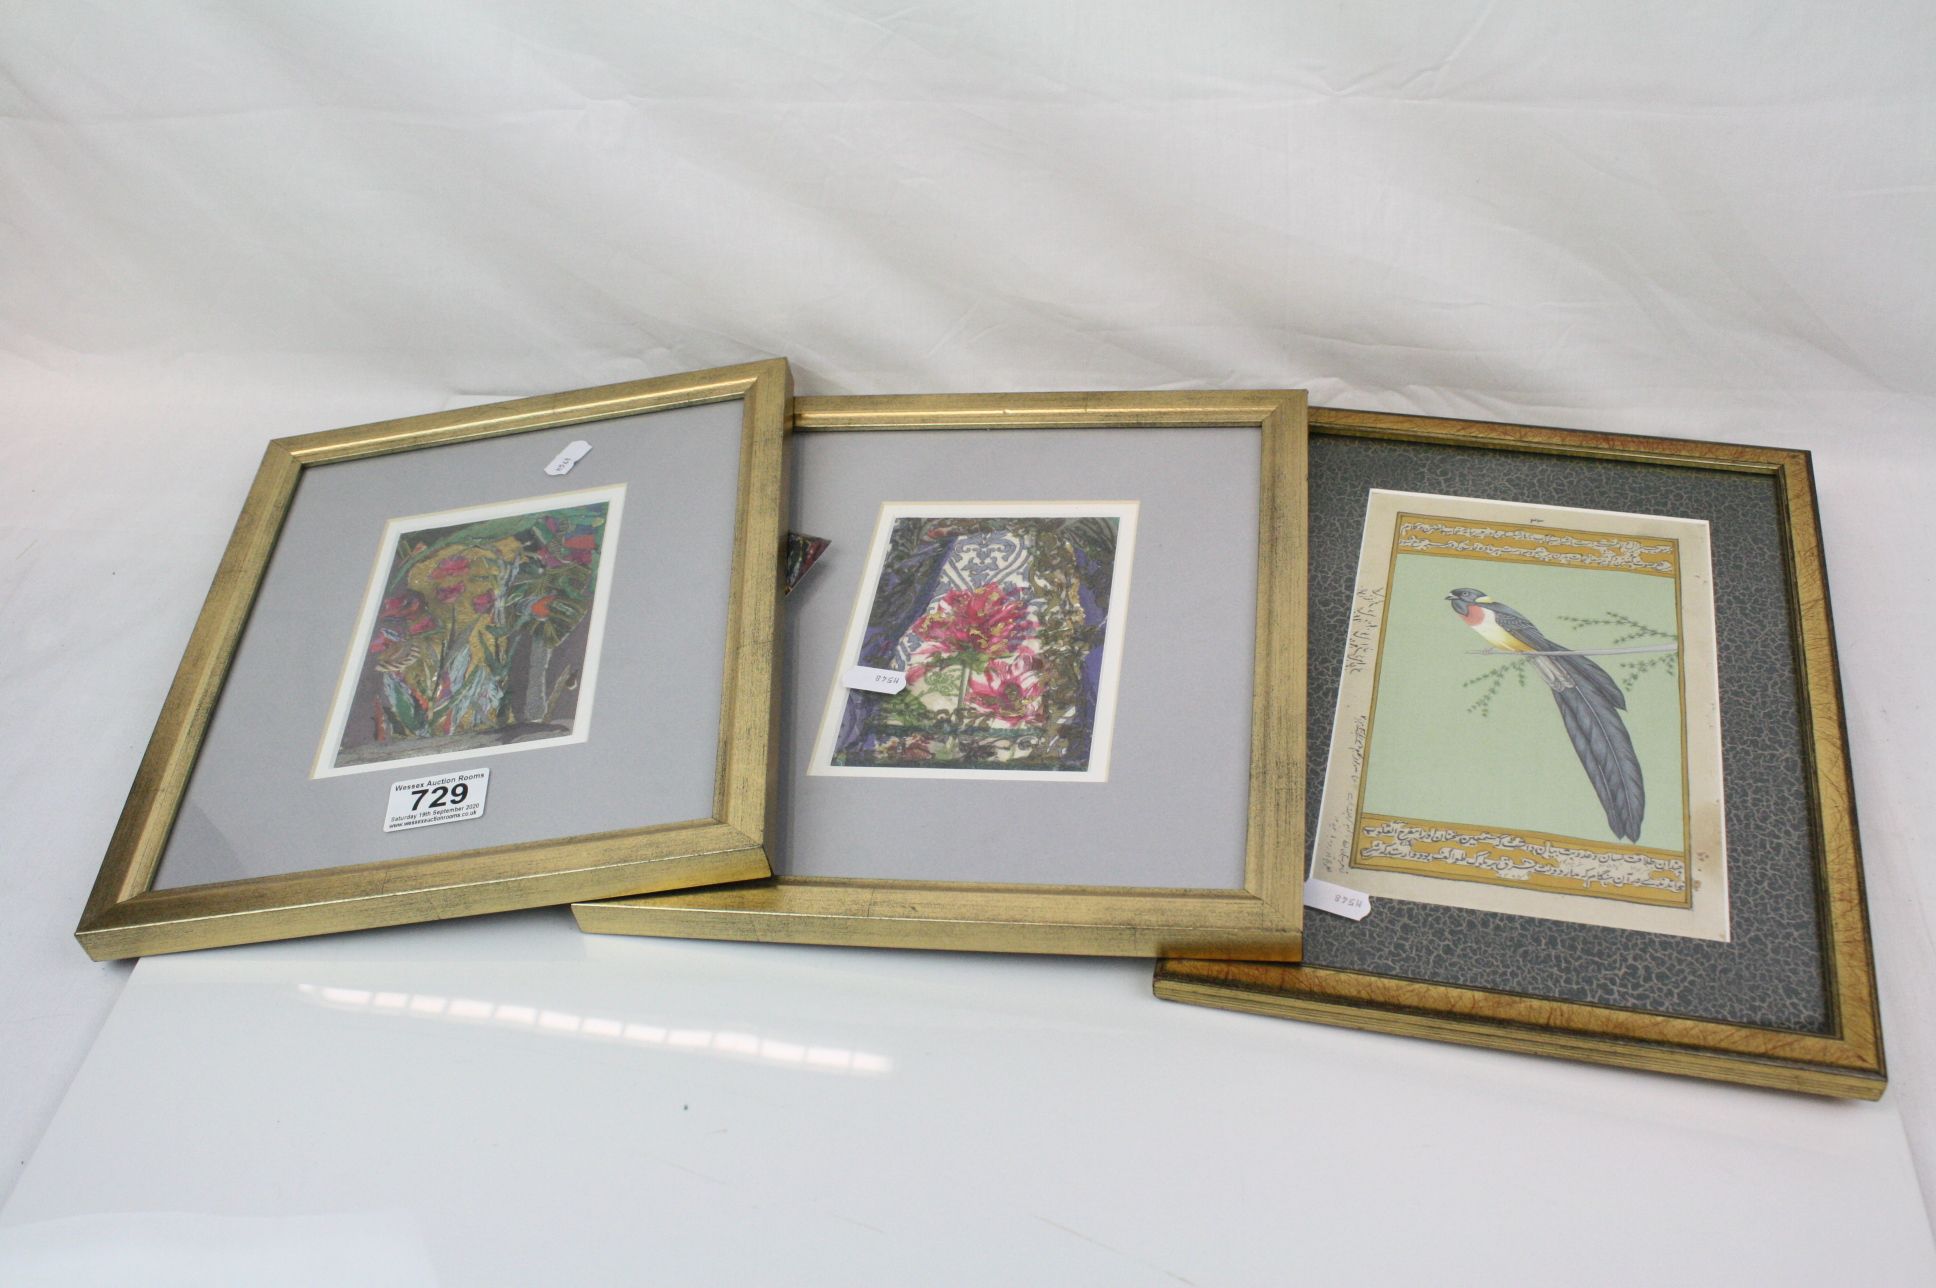 Pair of Kate Daunt Paper Collages titled Golden Tulips and Pink Tulips, 14cms x 10cms, framed and